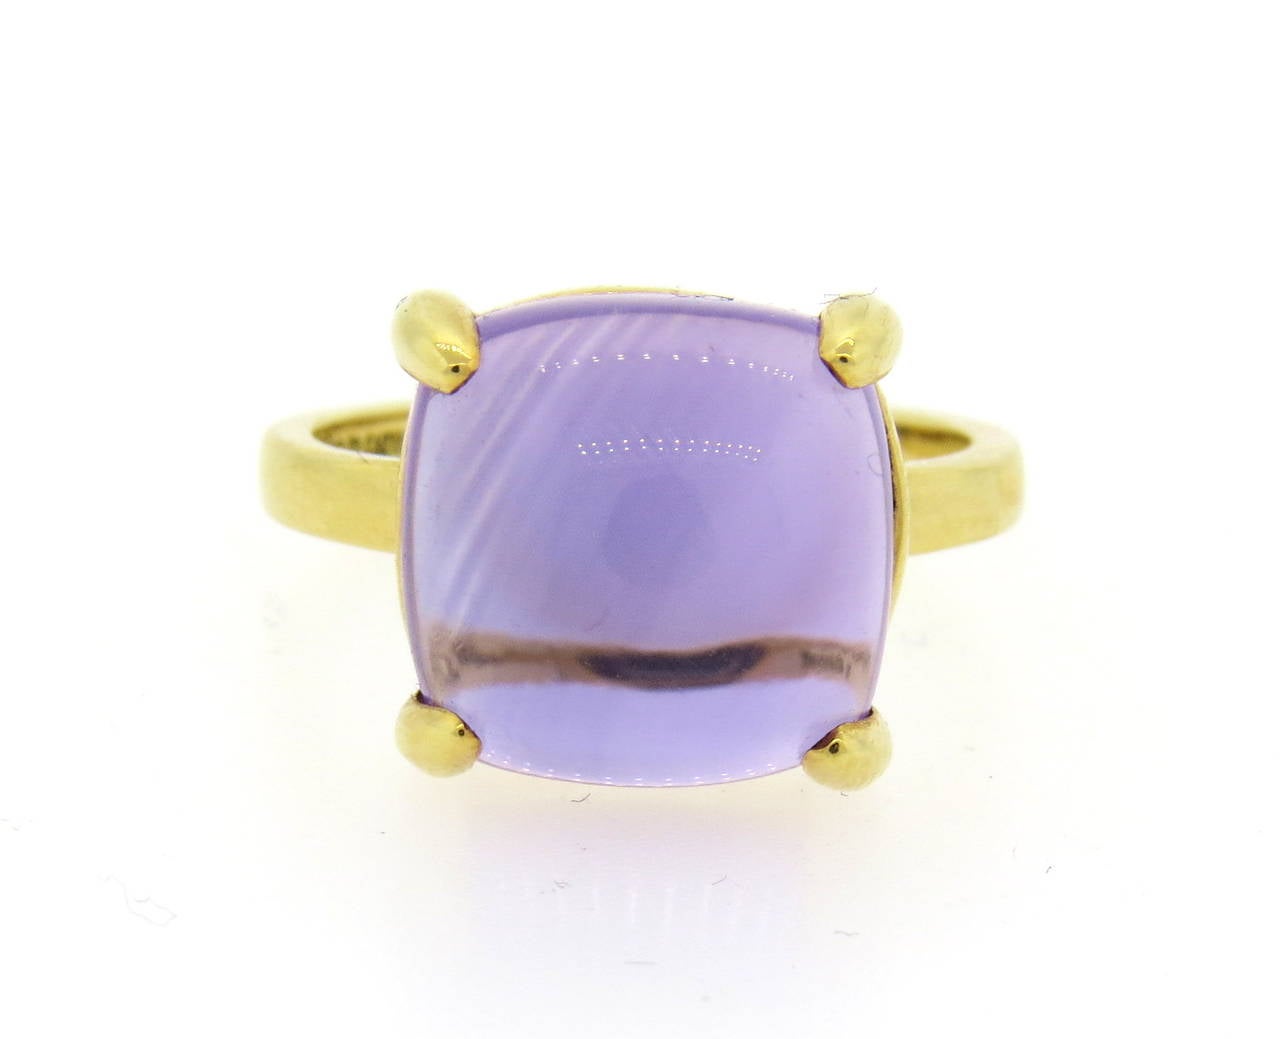 Tiffany & Co. 18k gold ring, designed by Paloma Picasso for Sugar Stacks collection with largest size amethyst cabochon. Ring size 6 1/2, ring top is 12mm x 12mm.  Marked Paloma Picasso,Tiffany & Co,750. Weight - 7.2gr.